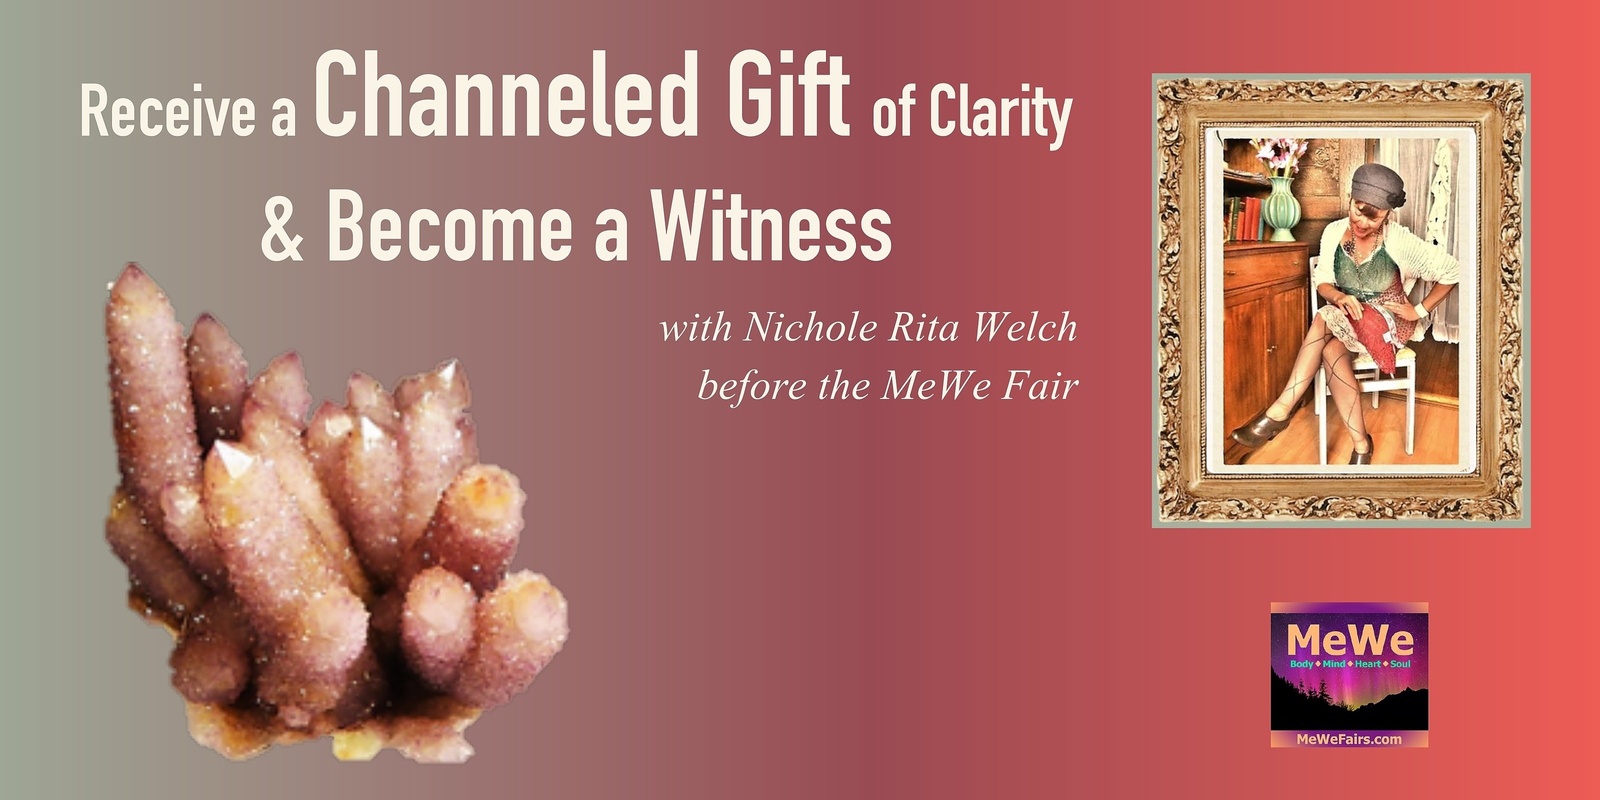 Banner image for Receive a Channeled Gift of Clarity & Become a Witness with Nichole Rita Welch before the MeWe Fair in Ashland